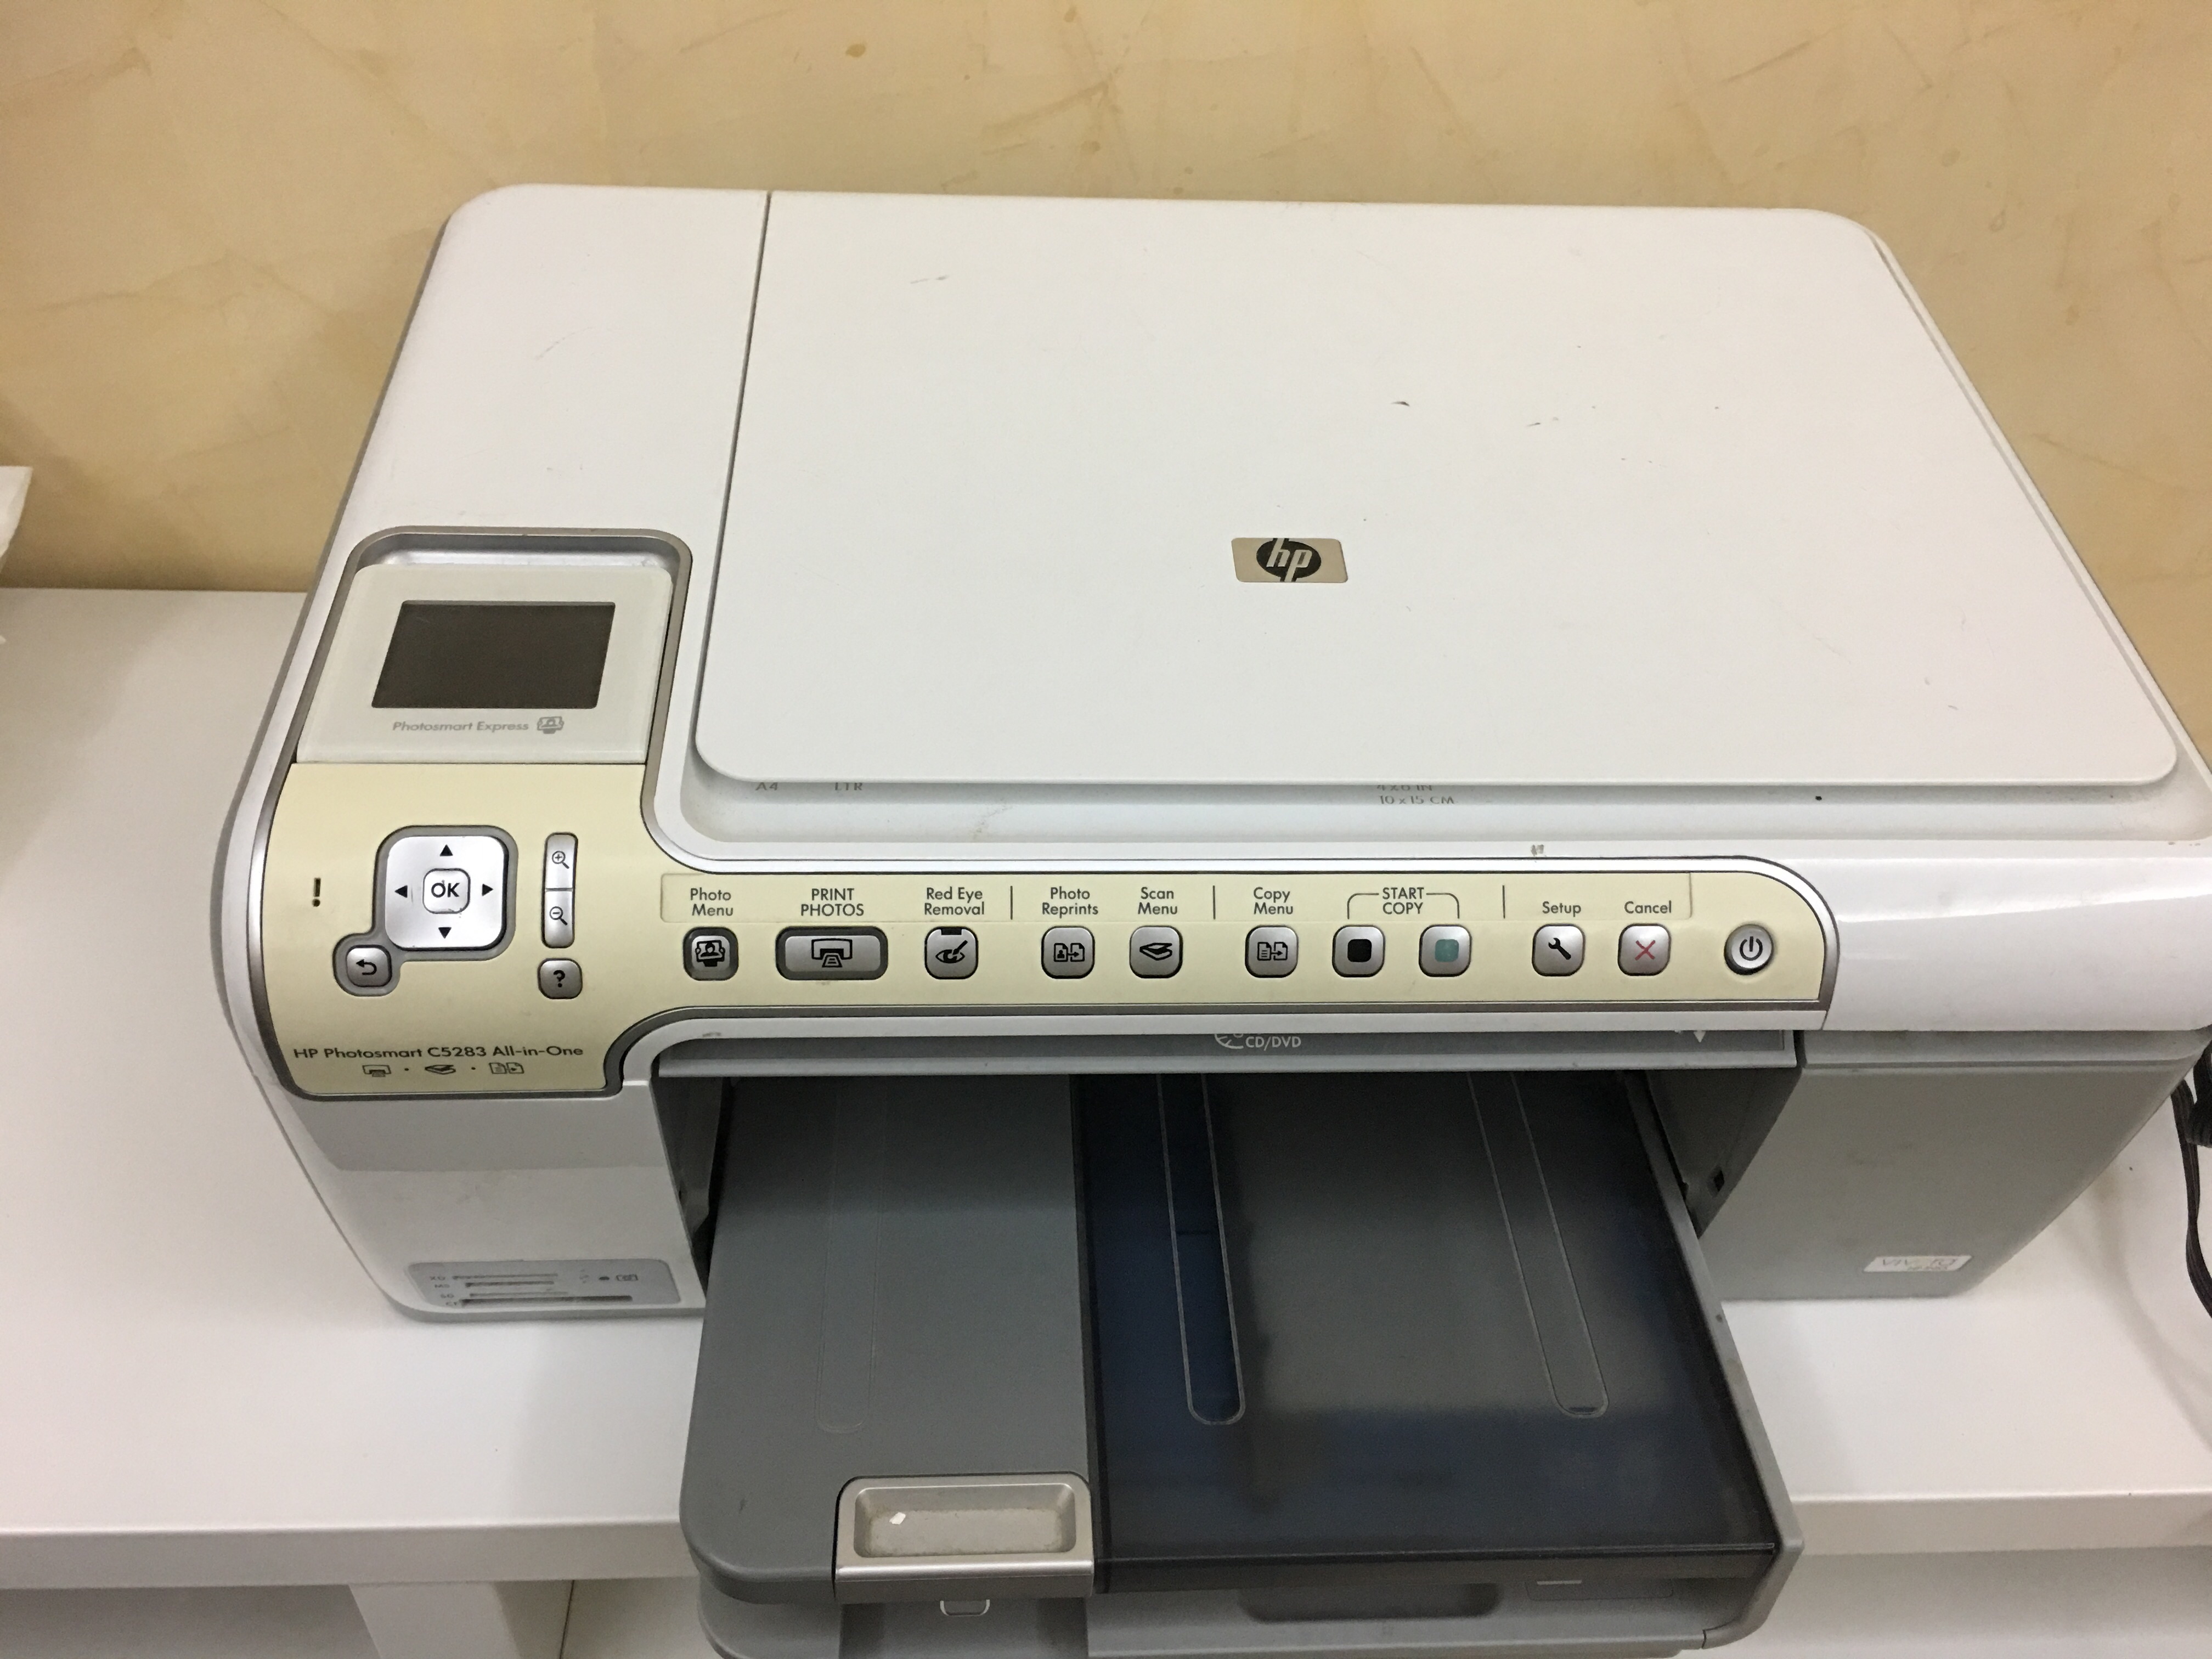 Hp printer photo smart c5283 all in one